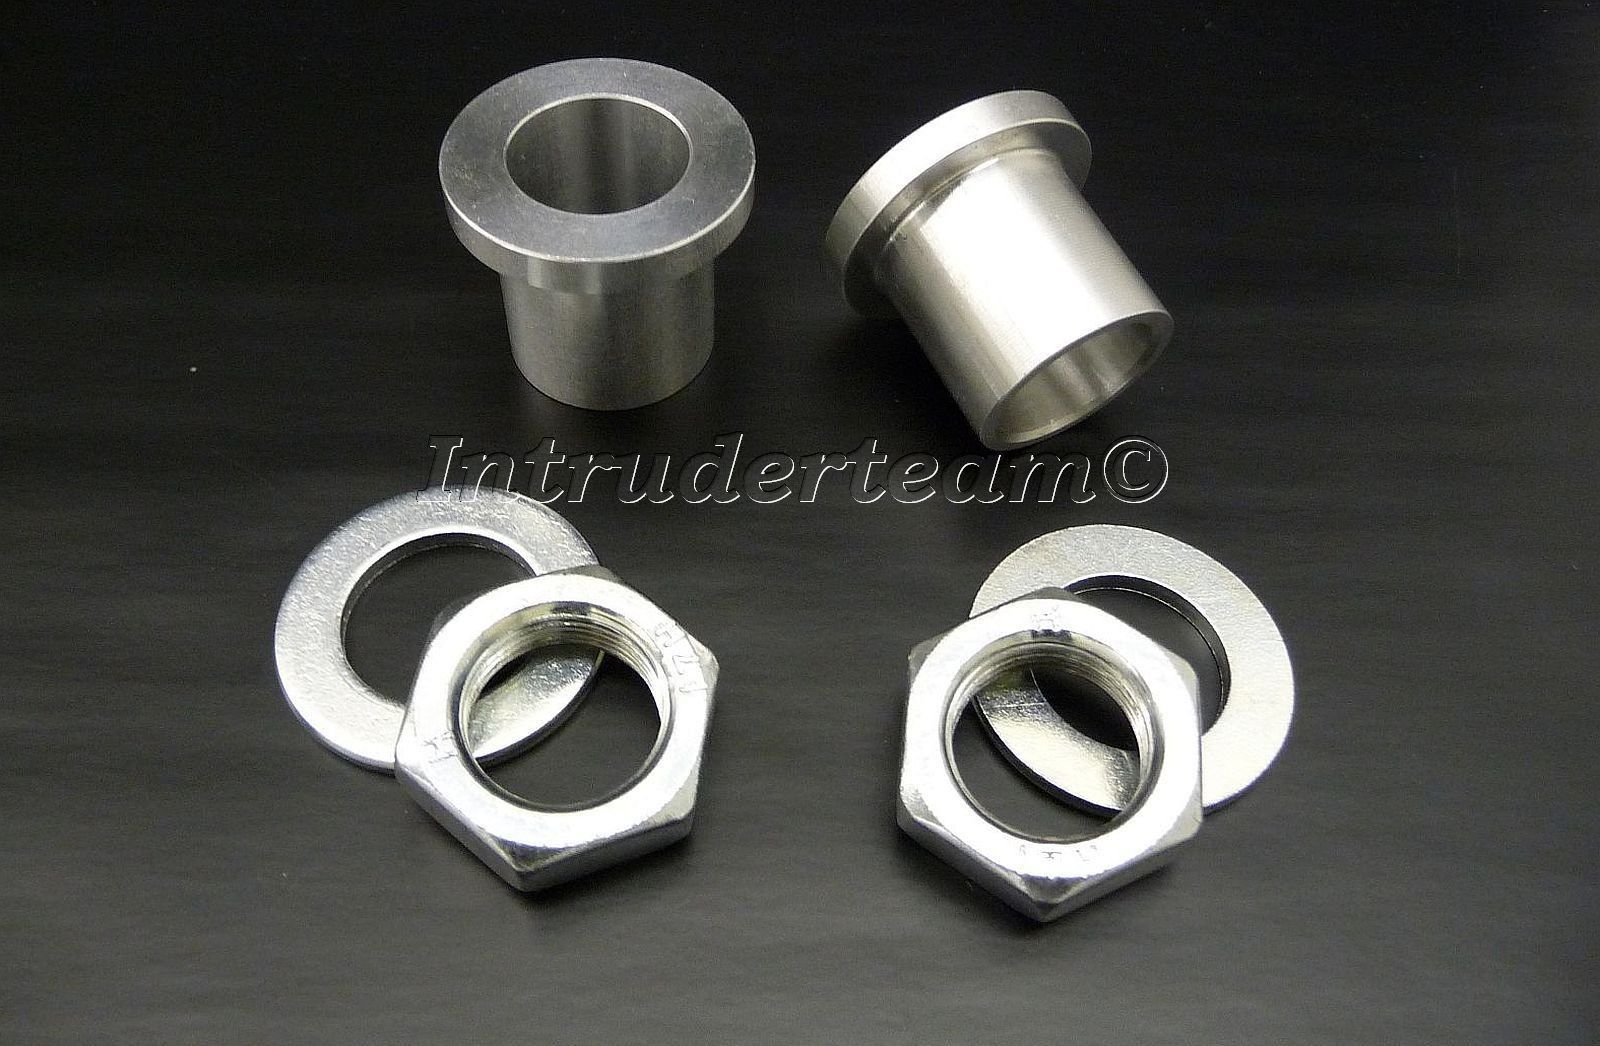 Riser adapter set For drilled risers Harley Davidson and C1500